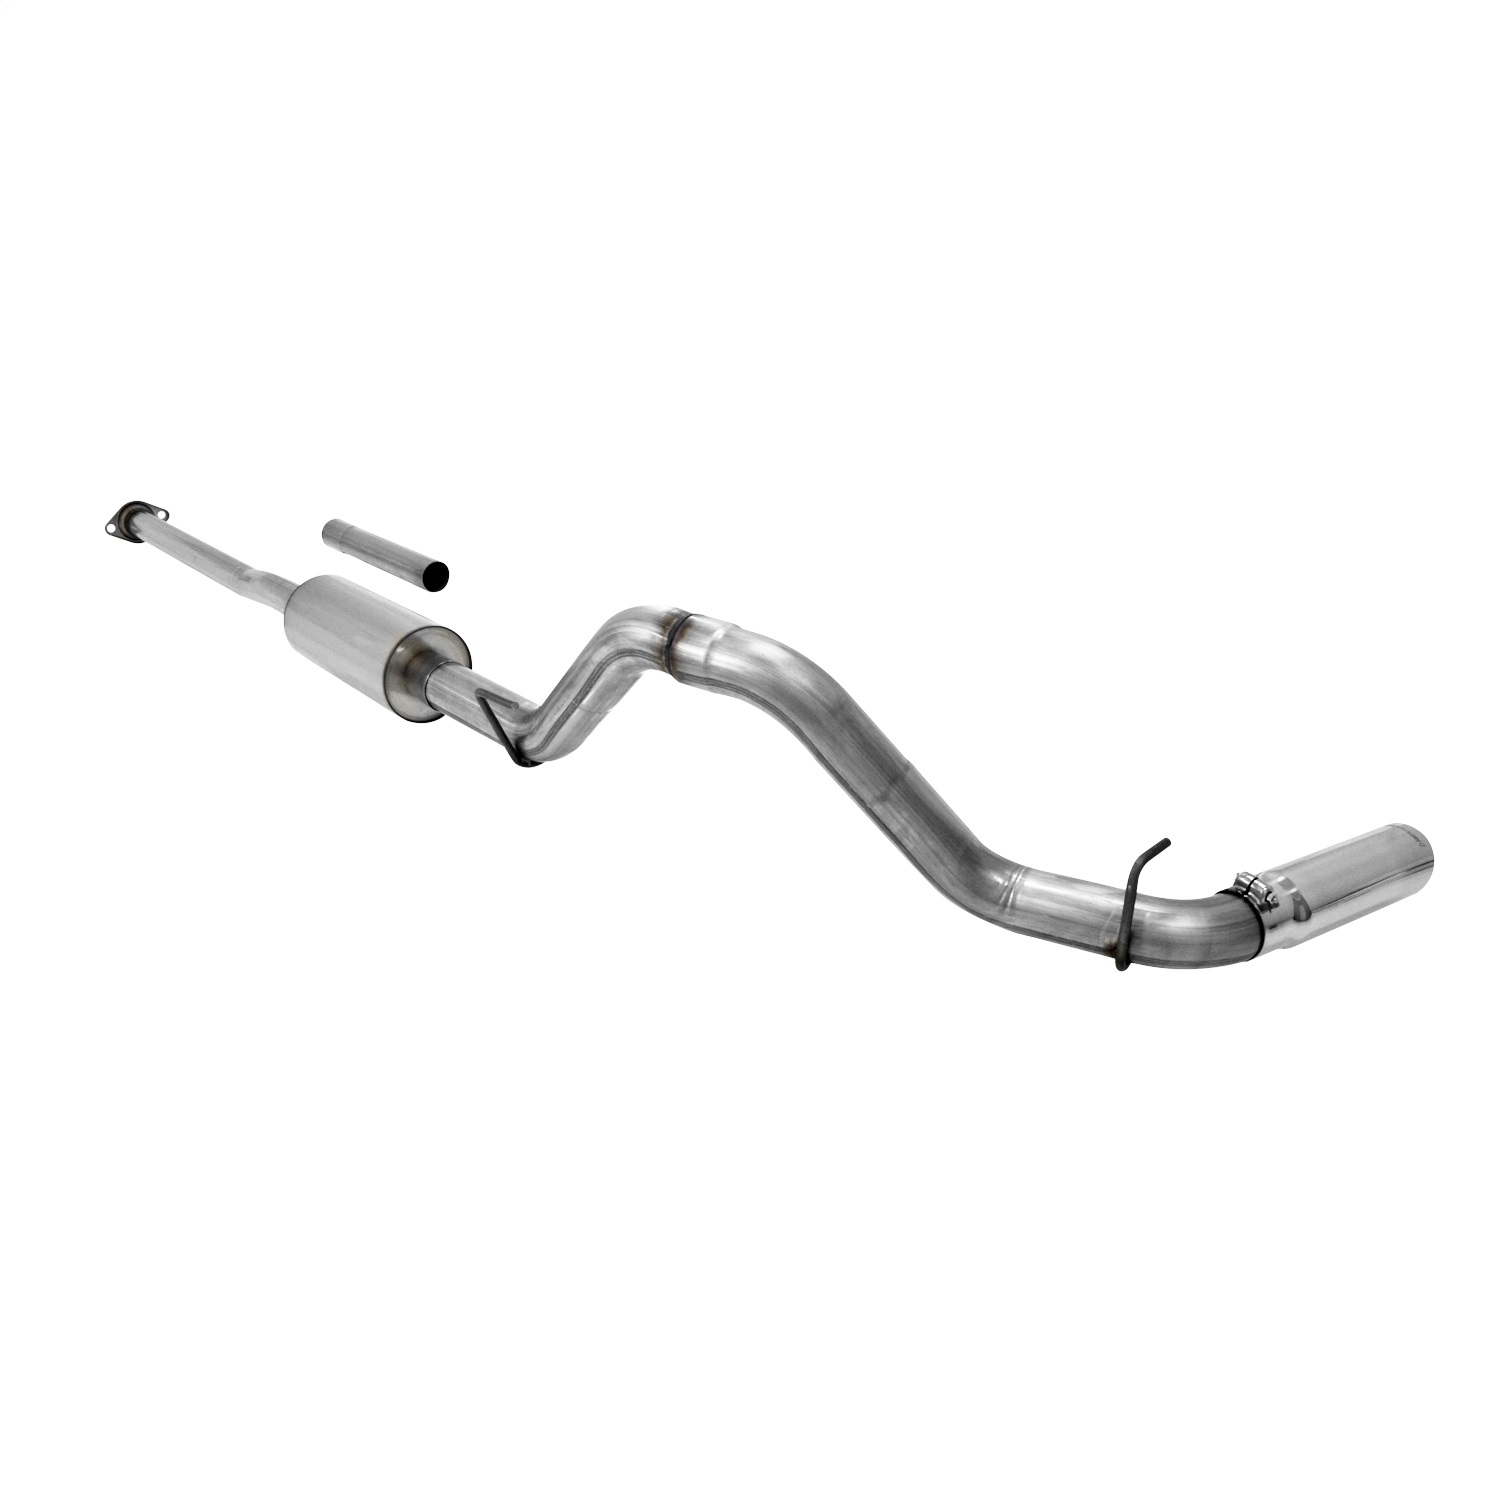 Flowmaster Flowmaster 819144 dBX Cat Back Exhaust System Fits 05-13 Tacoma